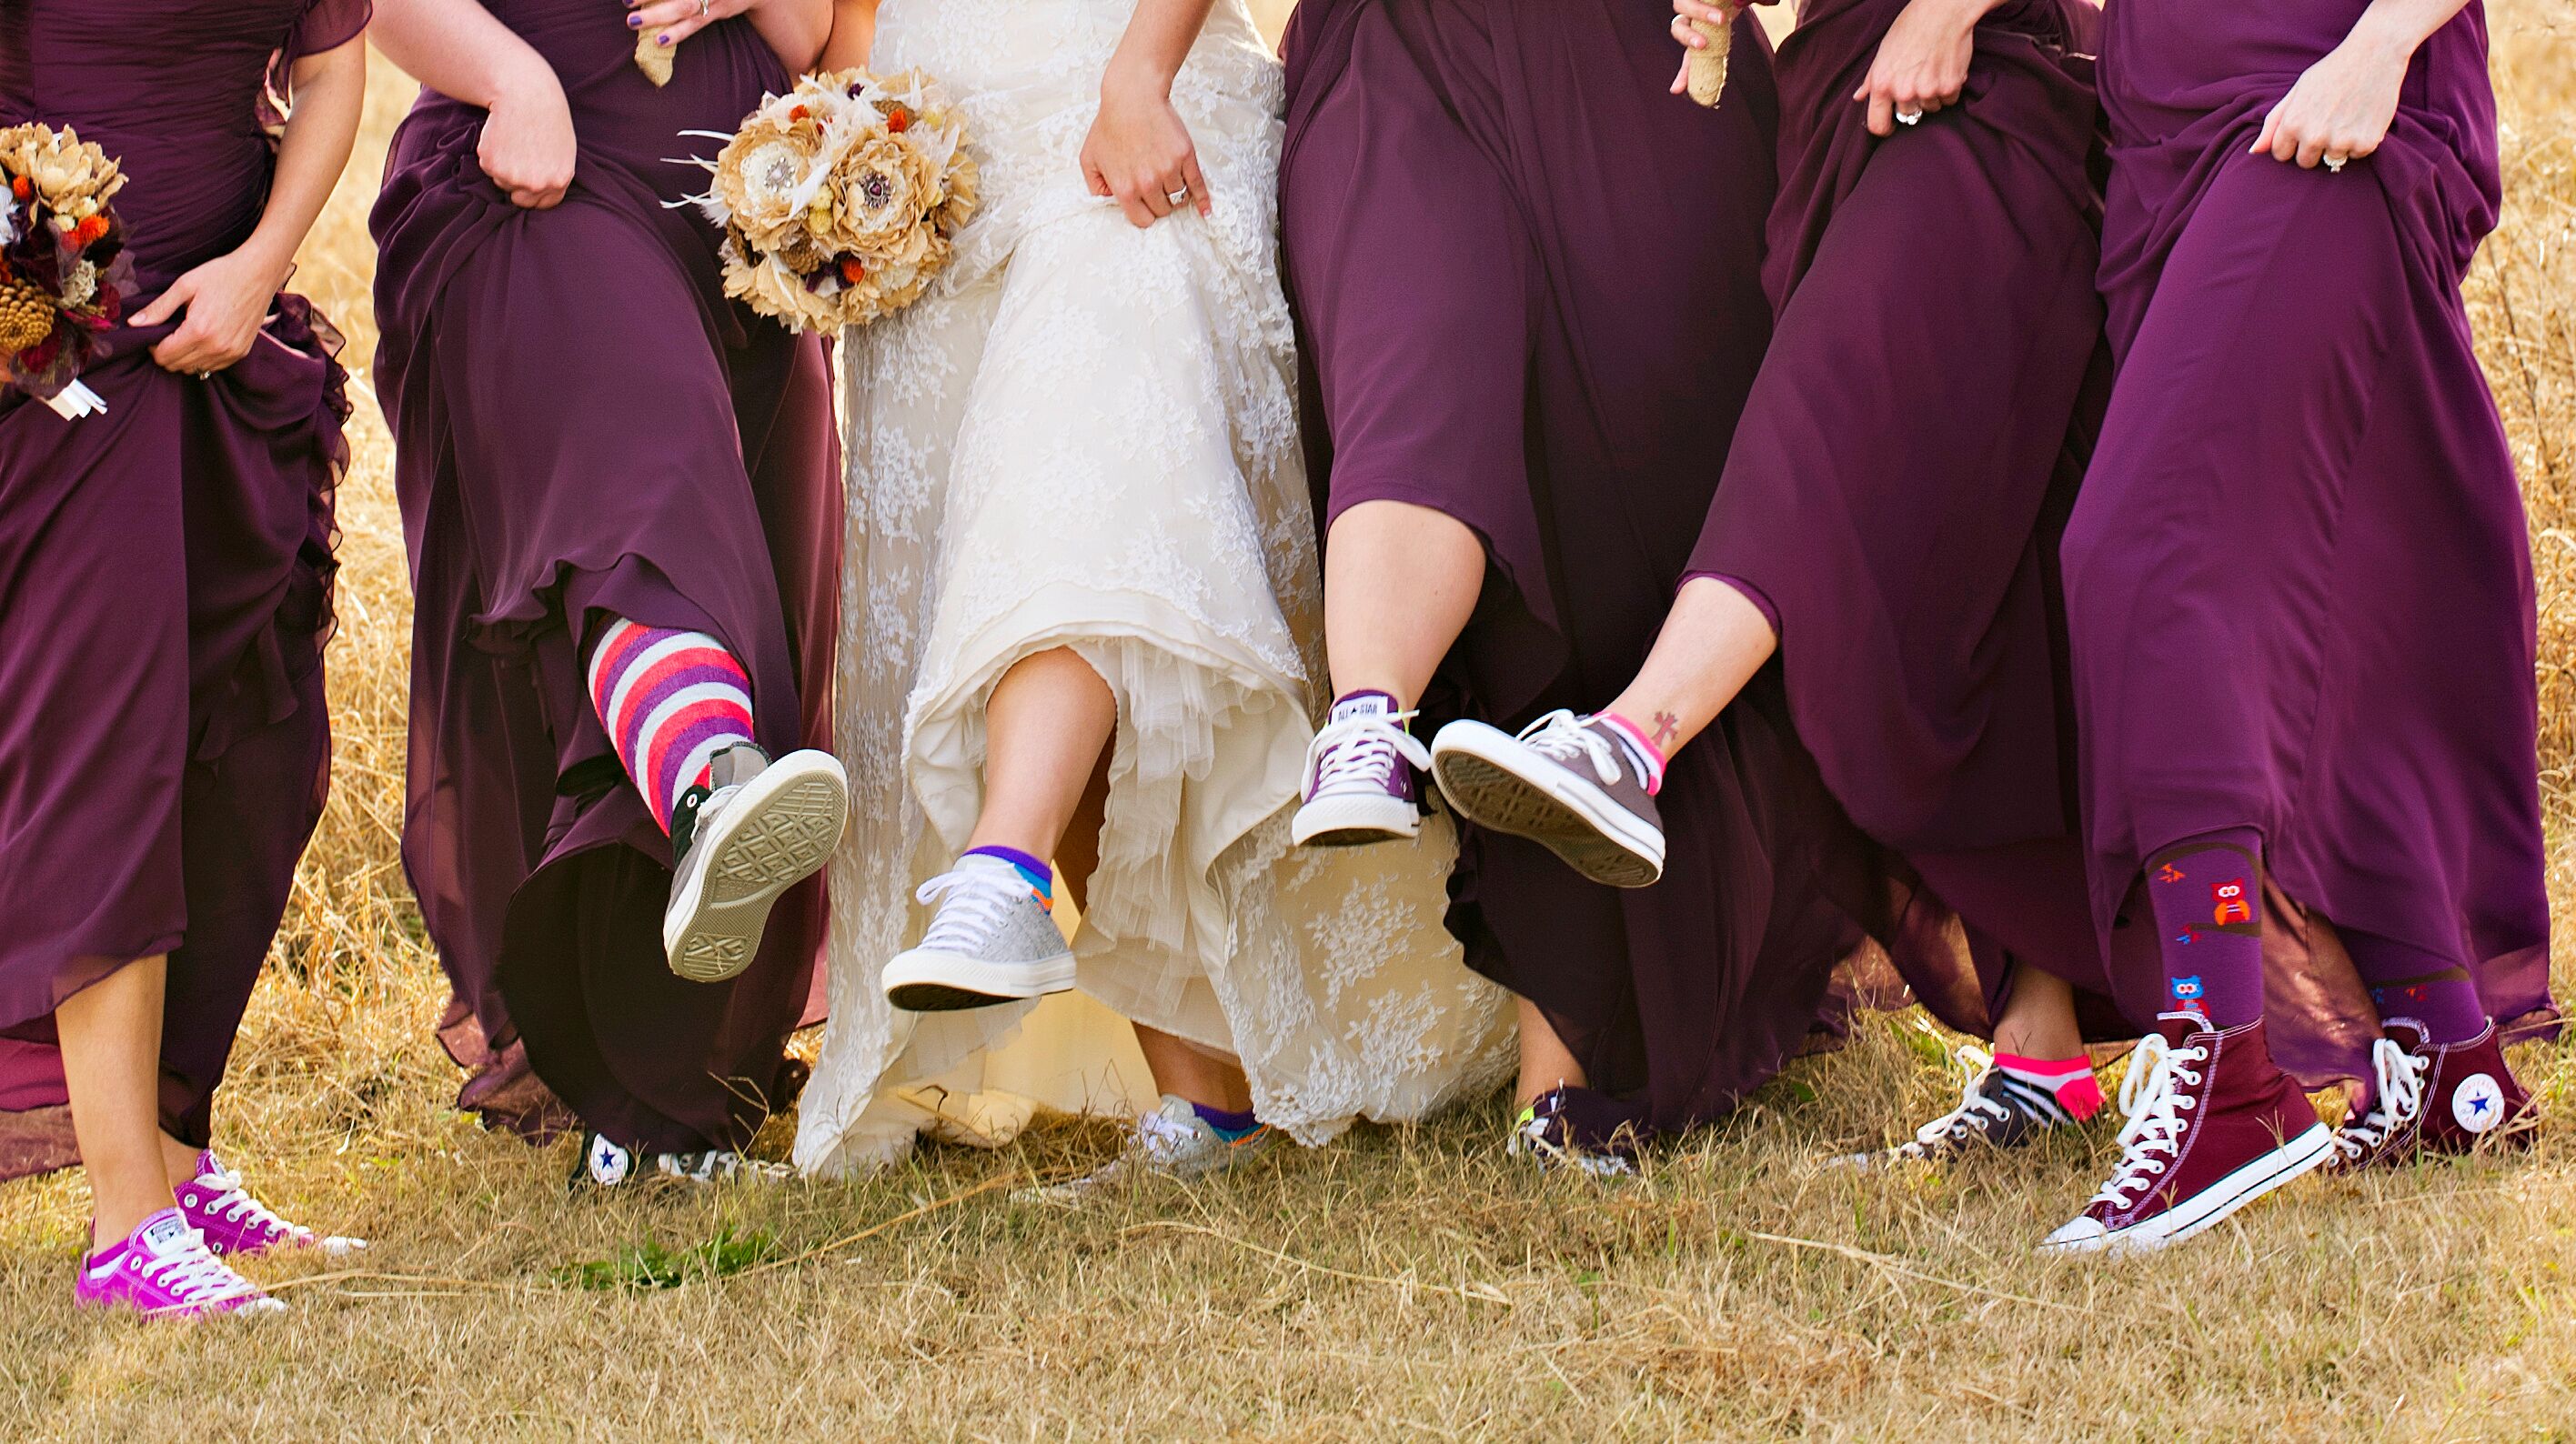 wedding dresses with converse